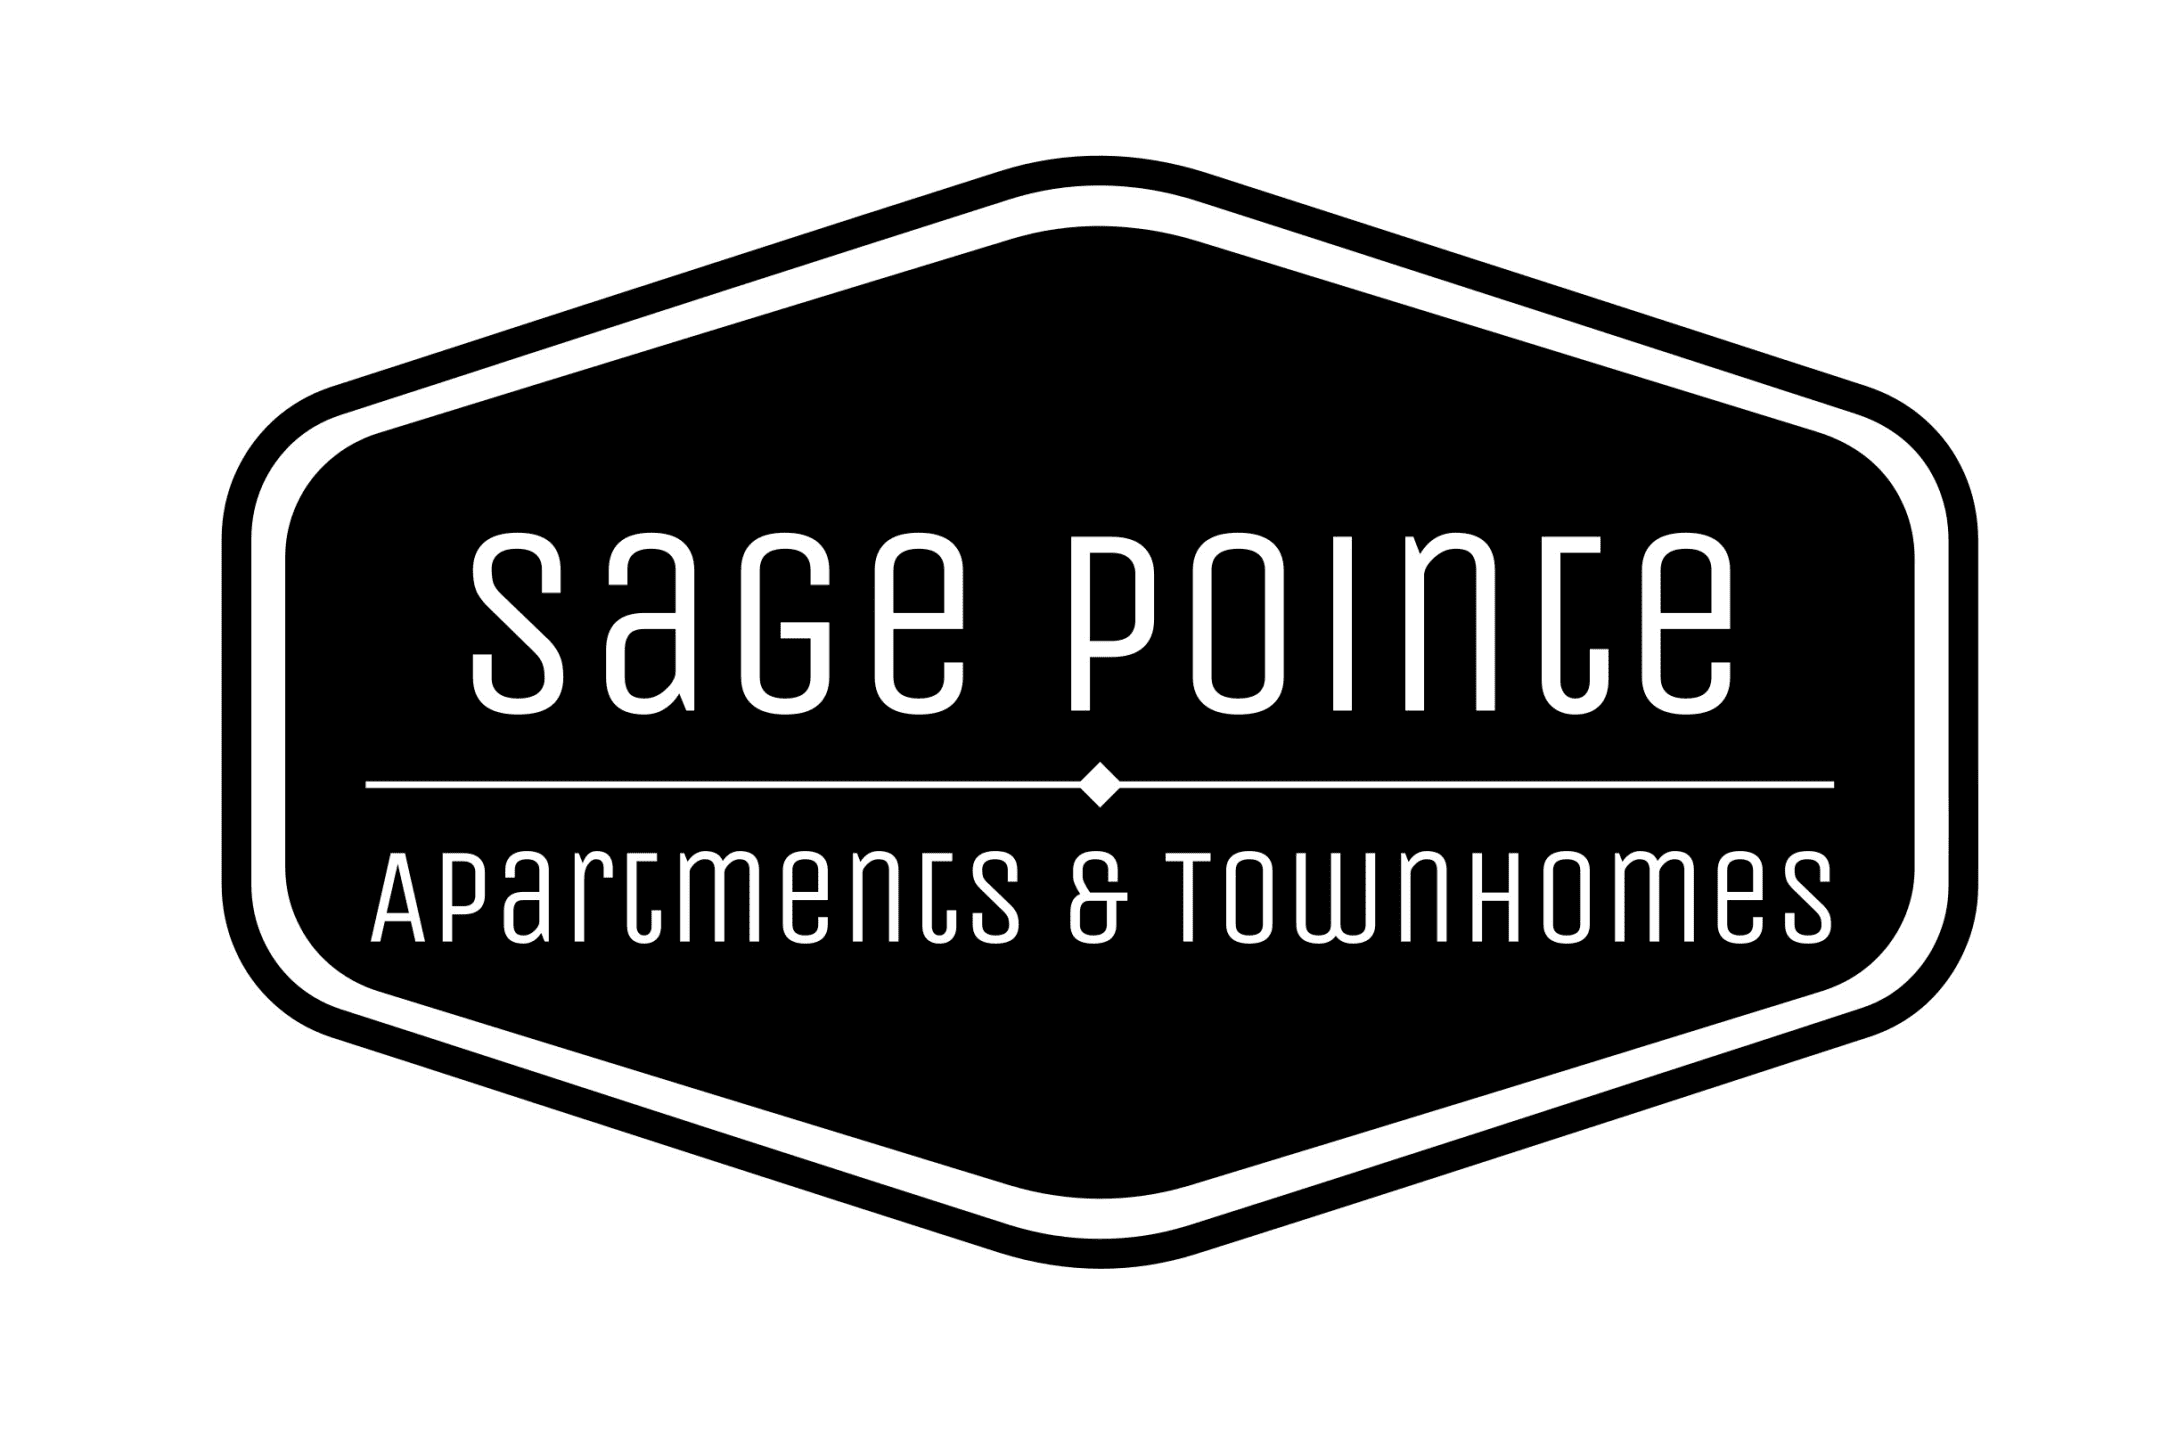 Sage Pointe Apartments & Townhomes - Charlotte, NC